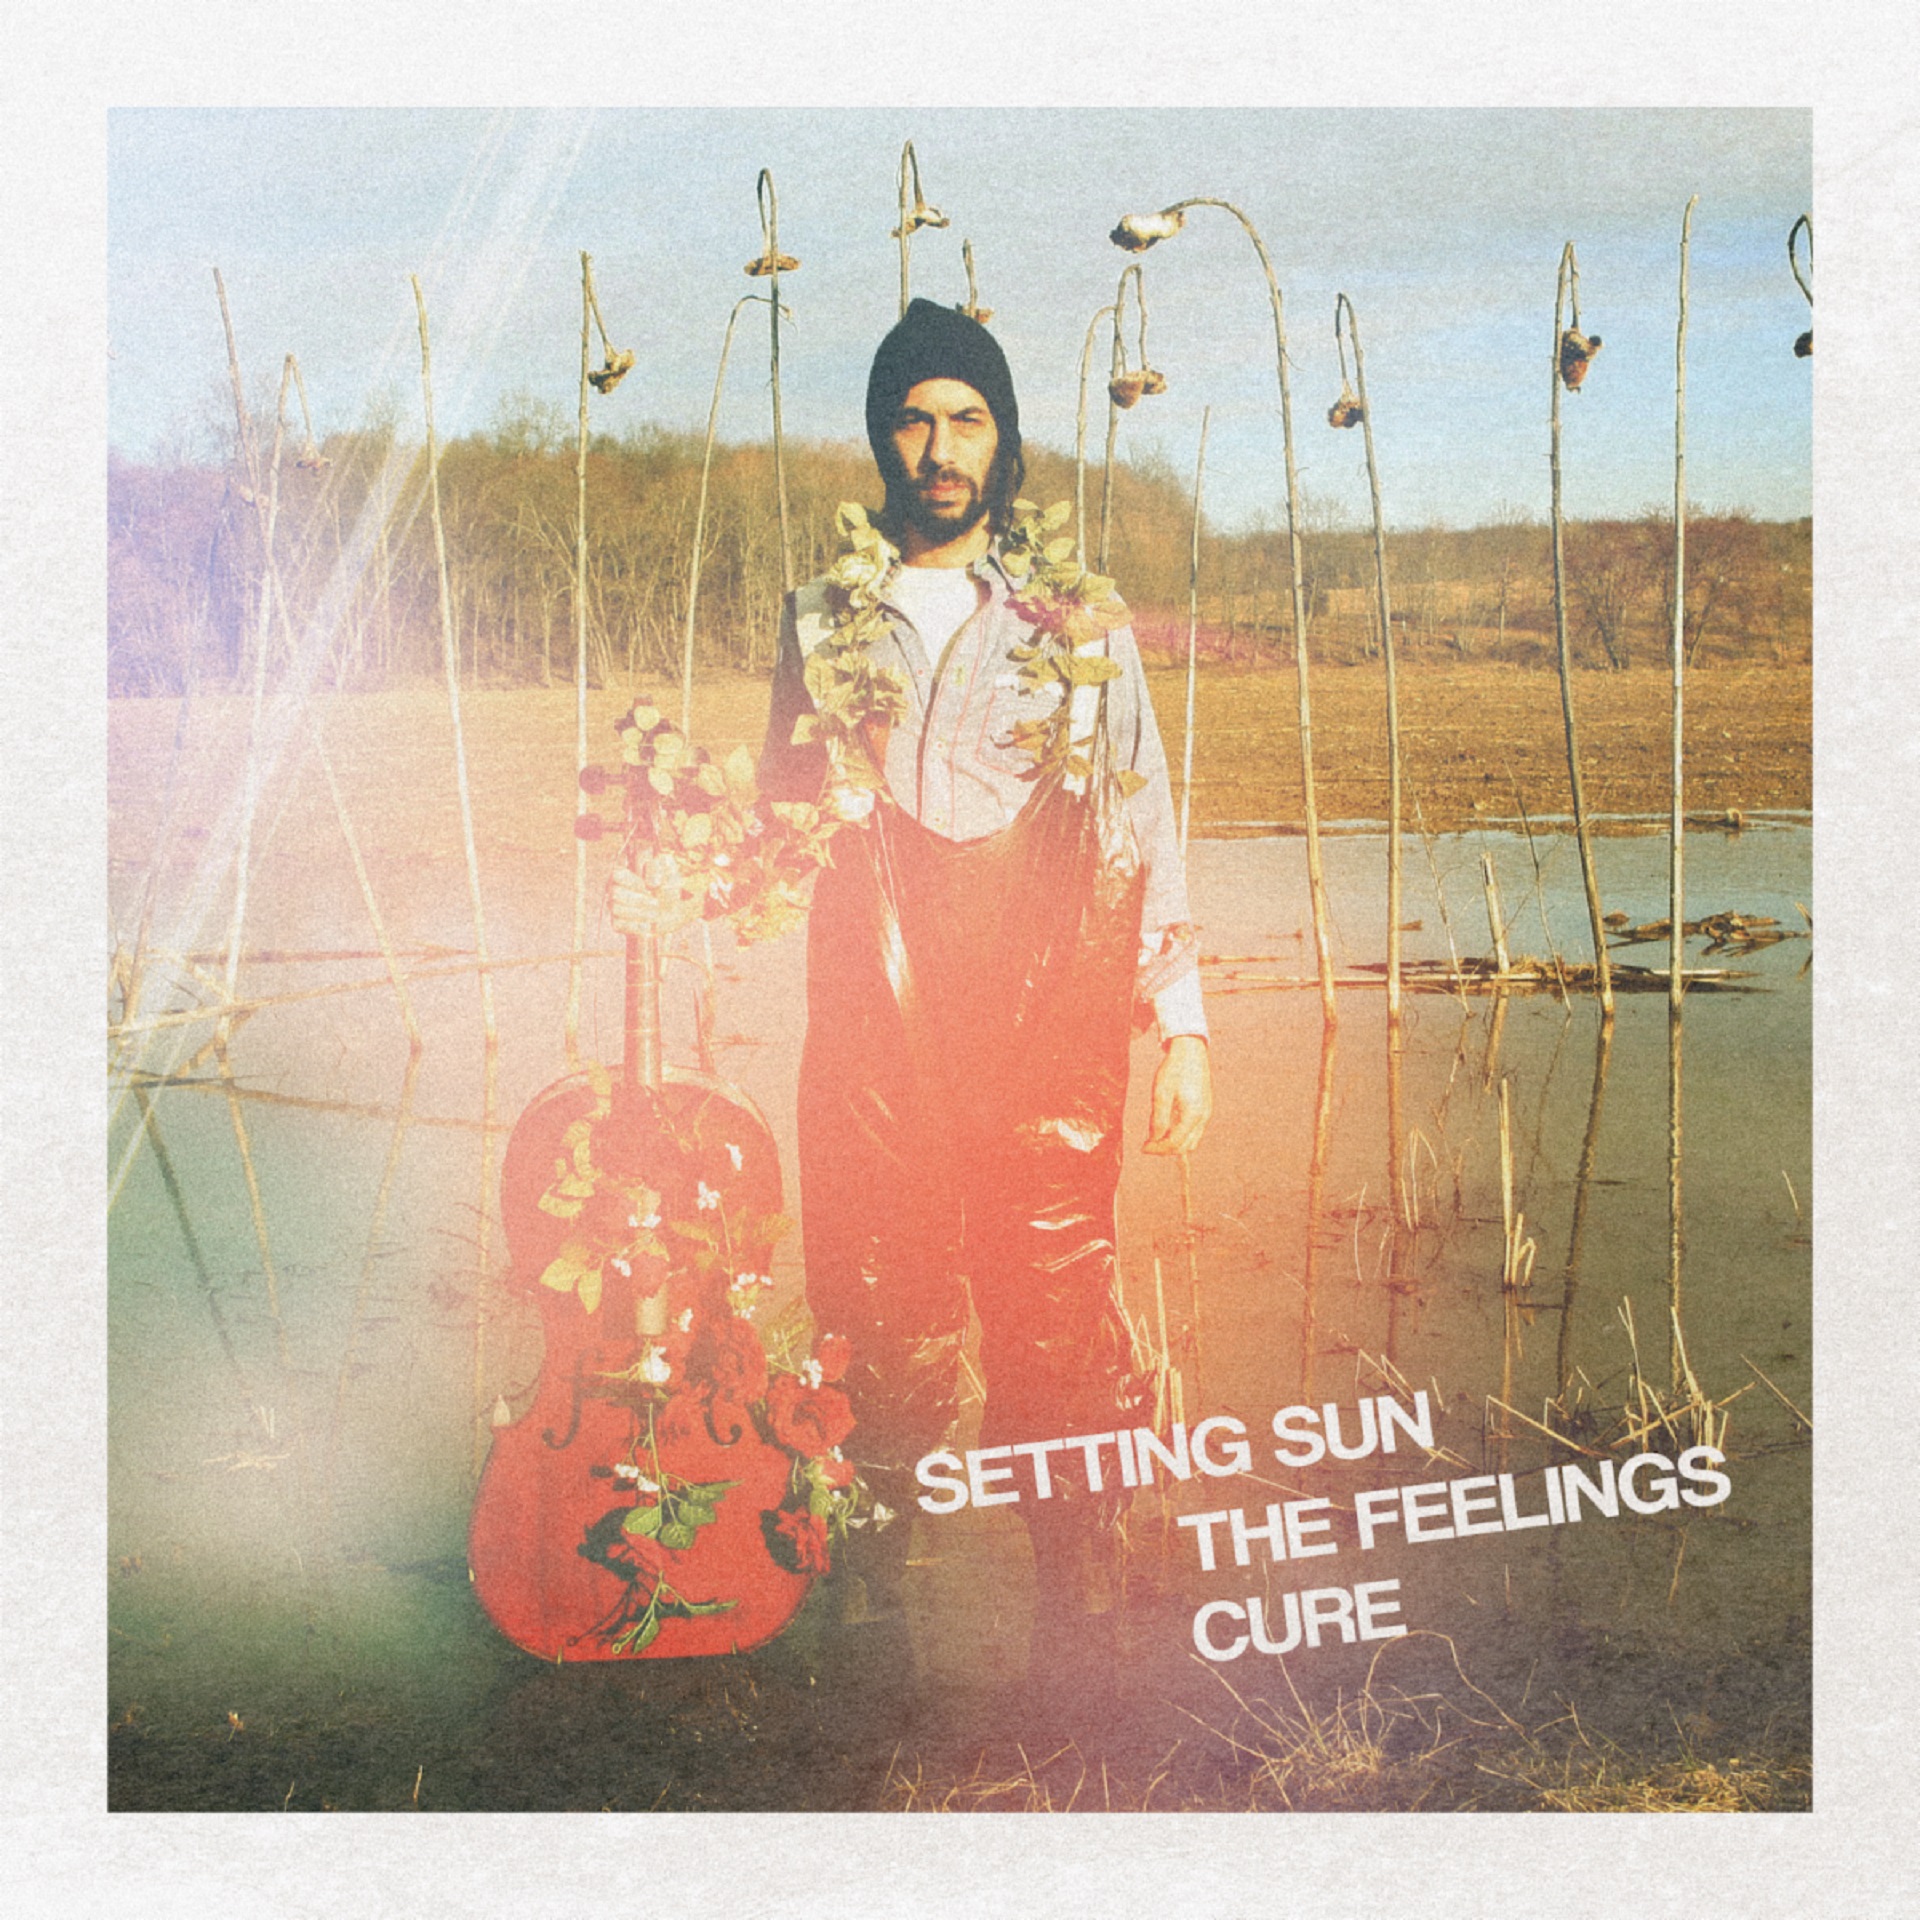 SETTING SUN SHARE SELF-PRODUCED SIXTH FULL-LENGTH LP THE FEELINGS CURE OUT NOW